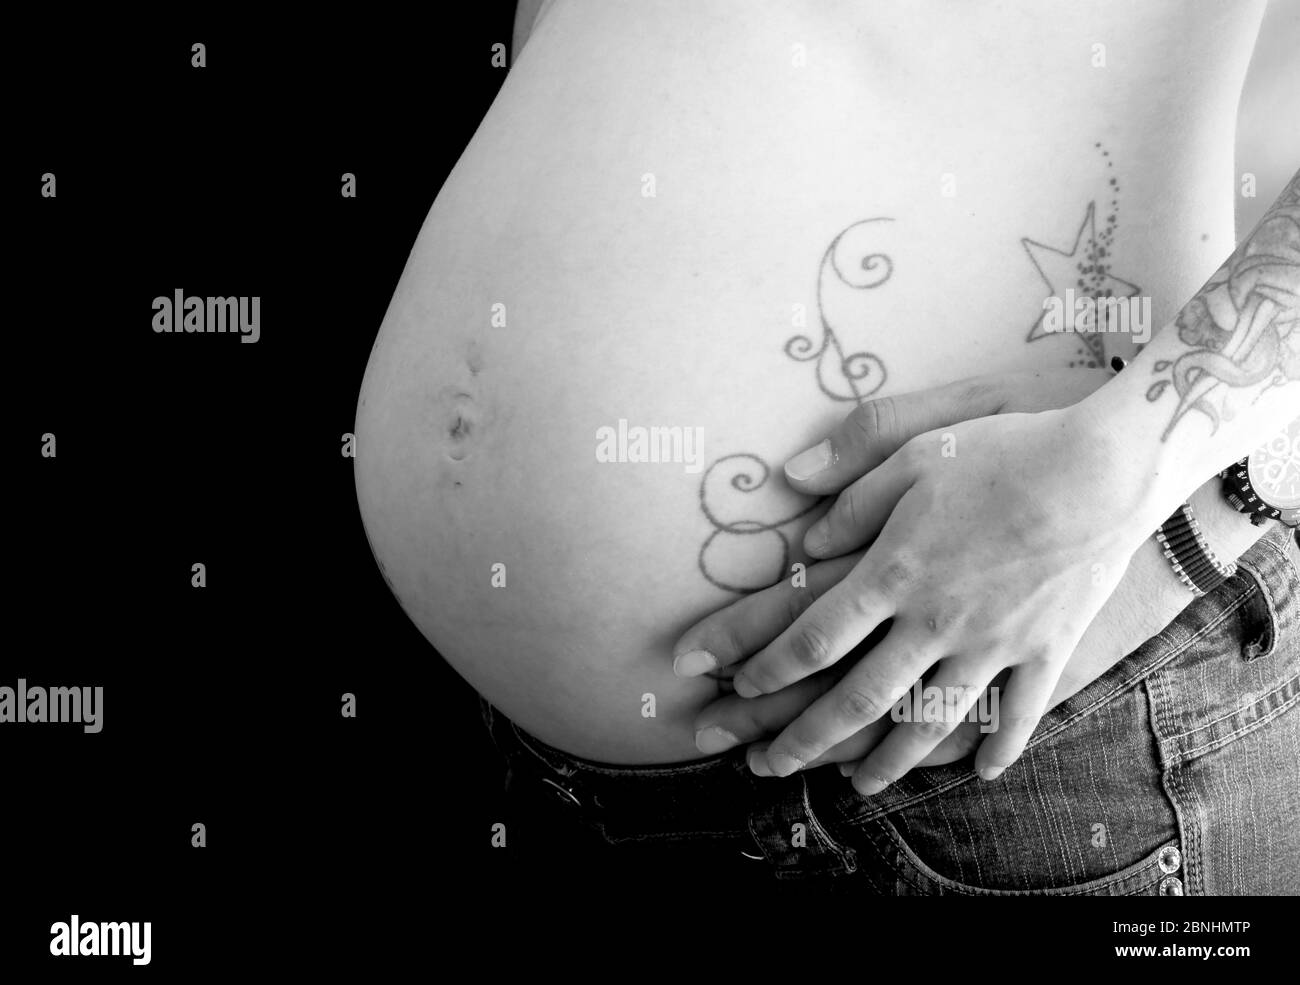 HipBellySide tattoos and pregnancy to stretch or not to stretch   BabyCenter